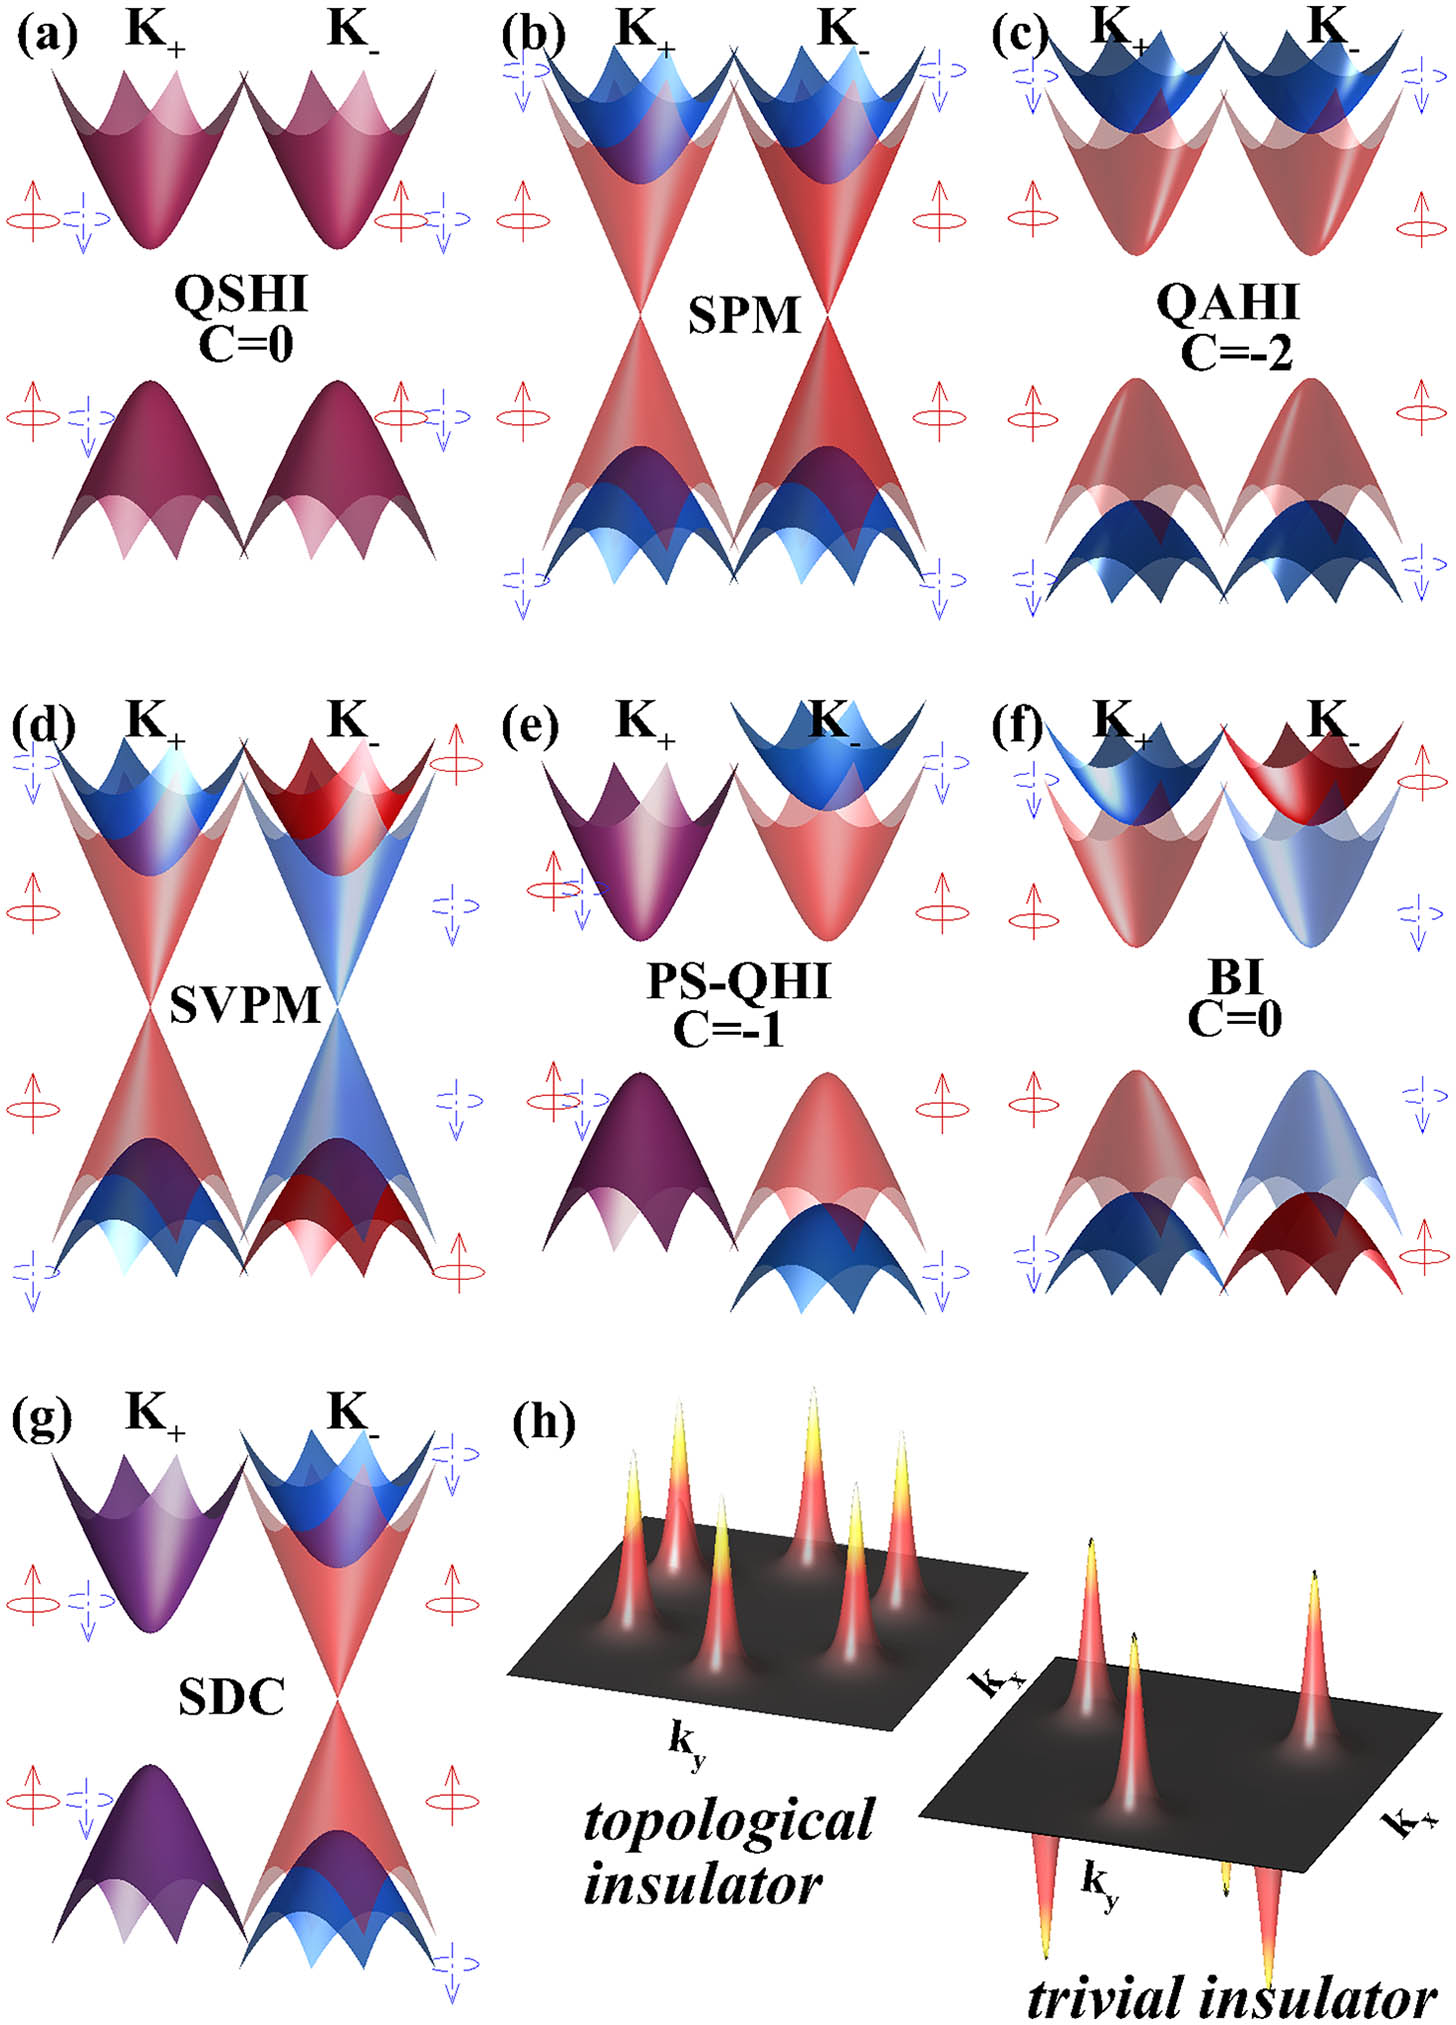 Electronic band structure of silicene for K and K′ point in the states of (a) QSHI, (b) SPM, (c) QAHI, (d) SVPM, (e) PS-QHI, (f) BI, and (g) SDC. The red arrow (blue arrow) is for up-spin (down-spin) electrons. (h) Berry curvature F(k→) can distinguish the topological insulator and trivial insulator.